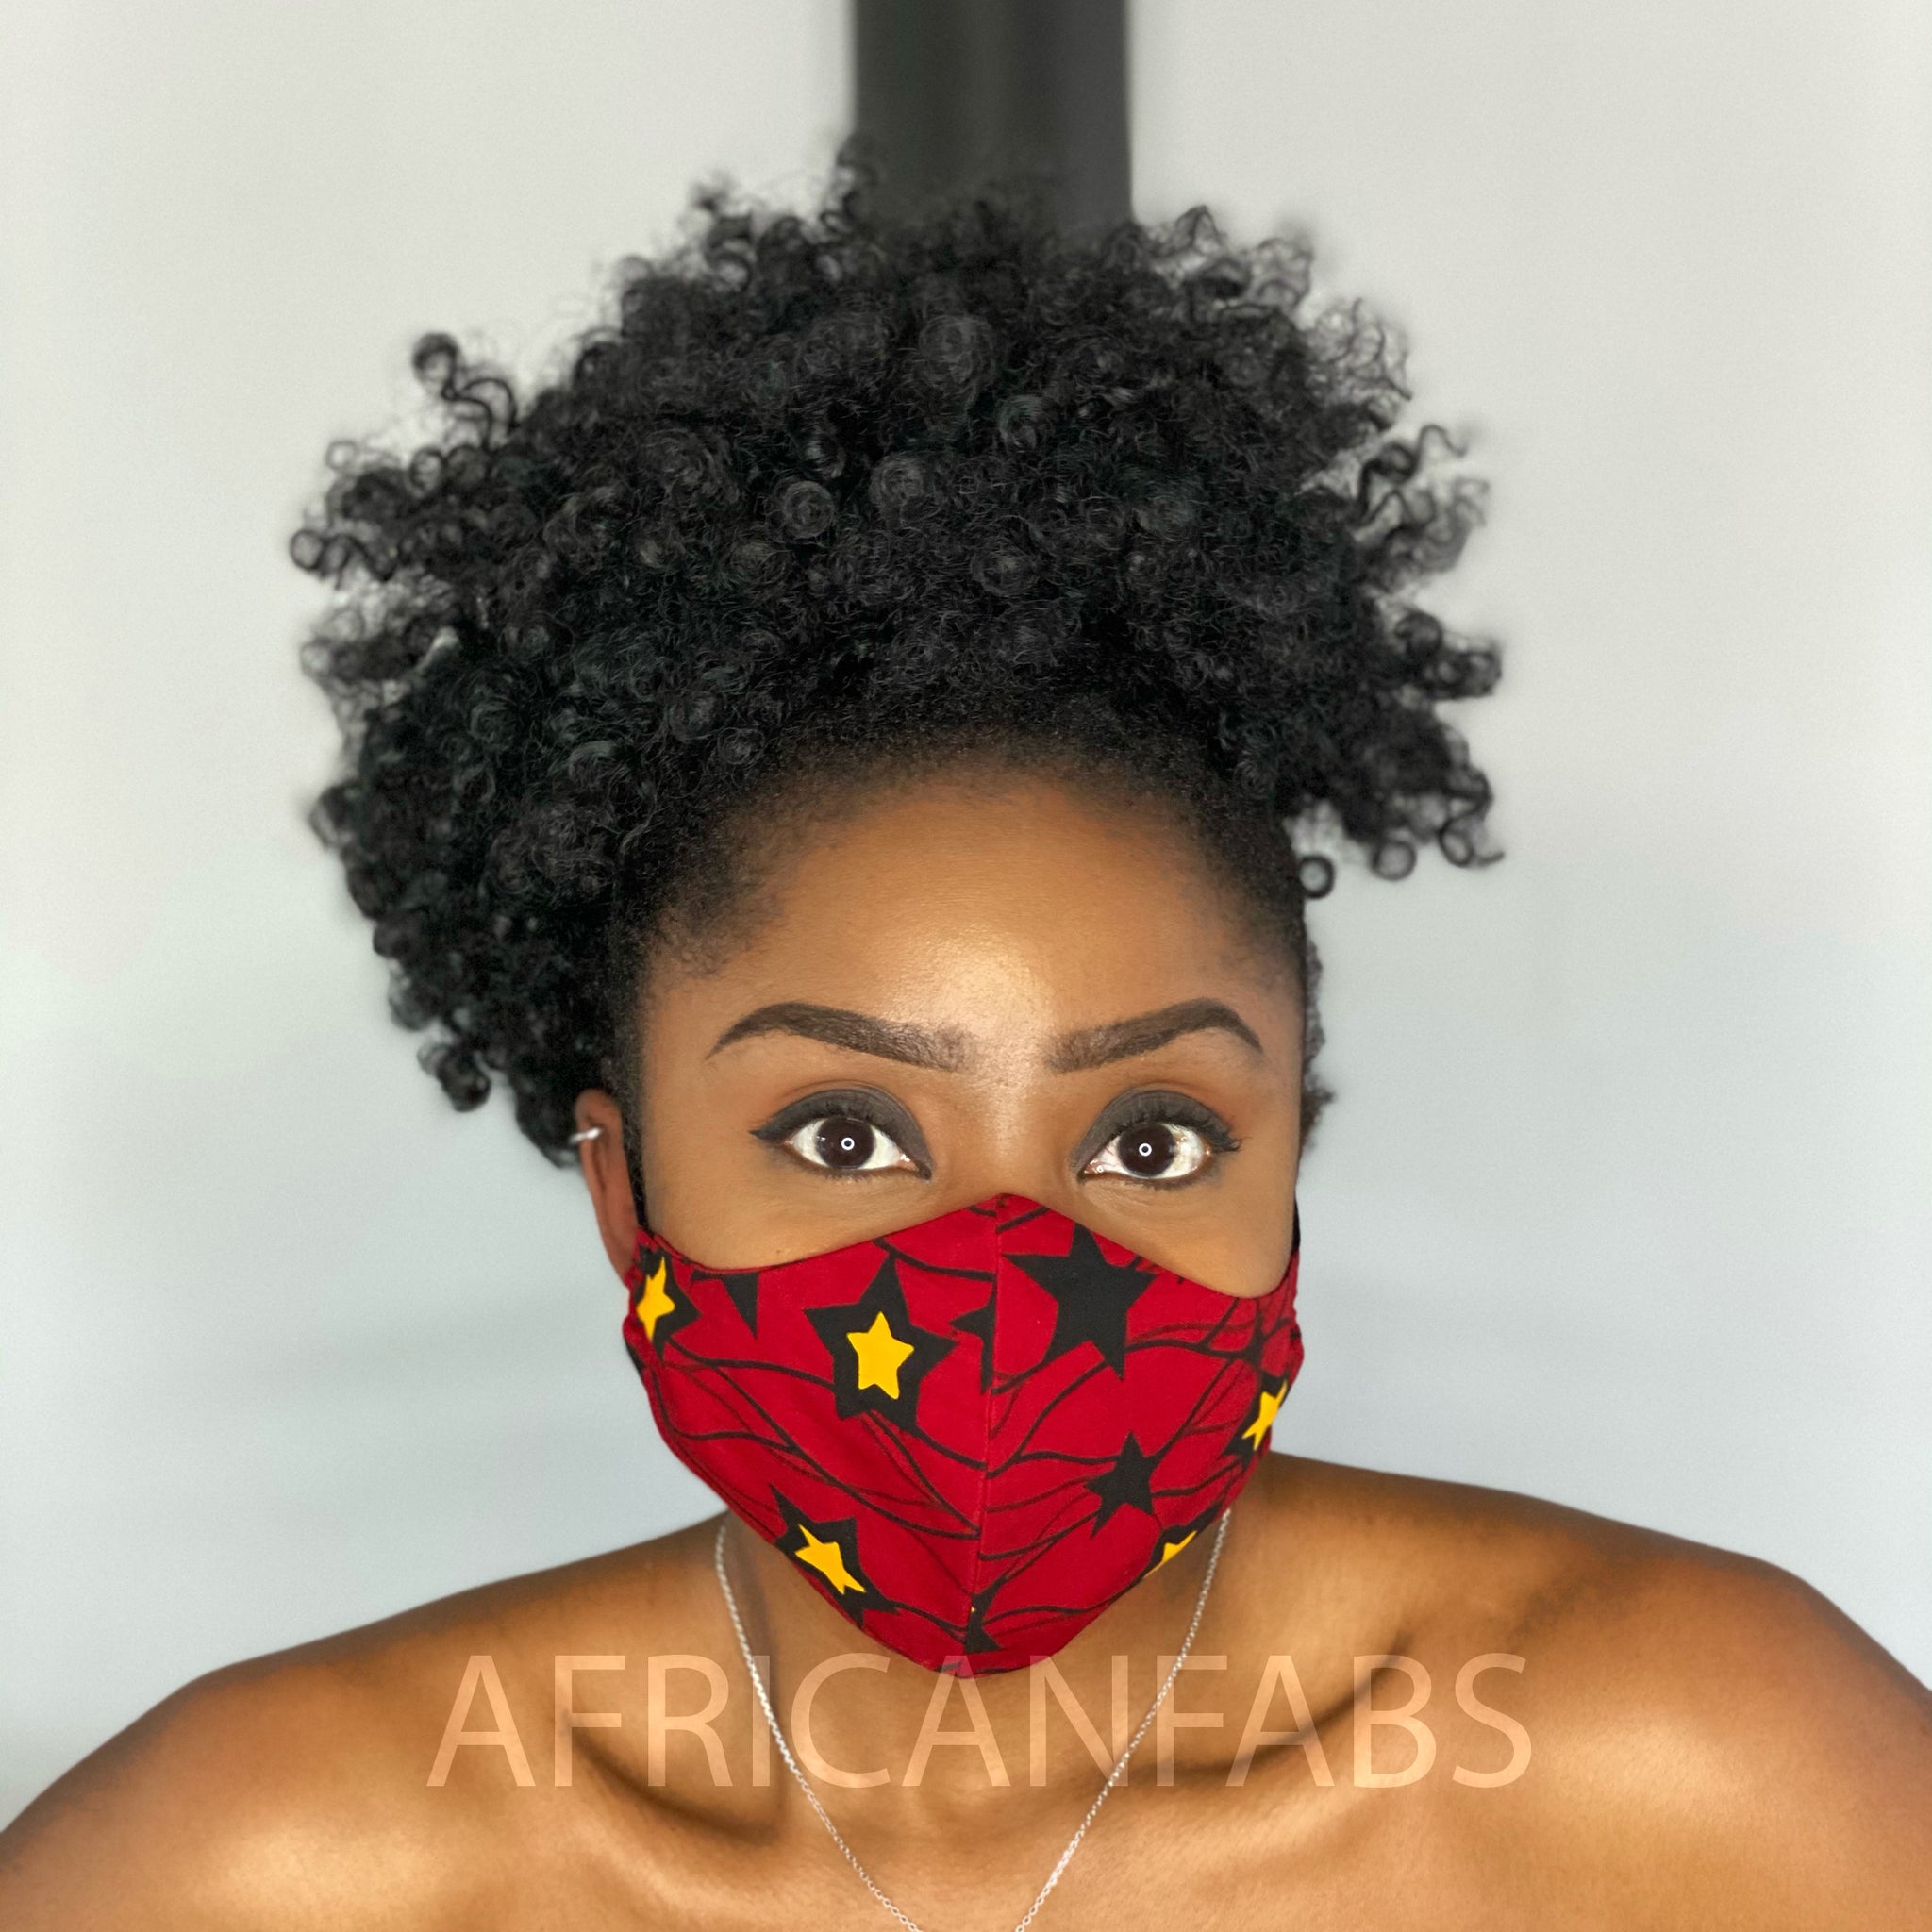 African print Mouth mask / Face mask made of Vlisco fabric (Premium model) Unisex - Red star